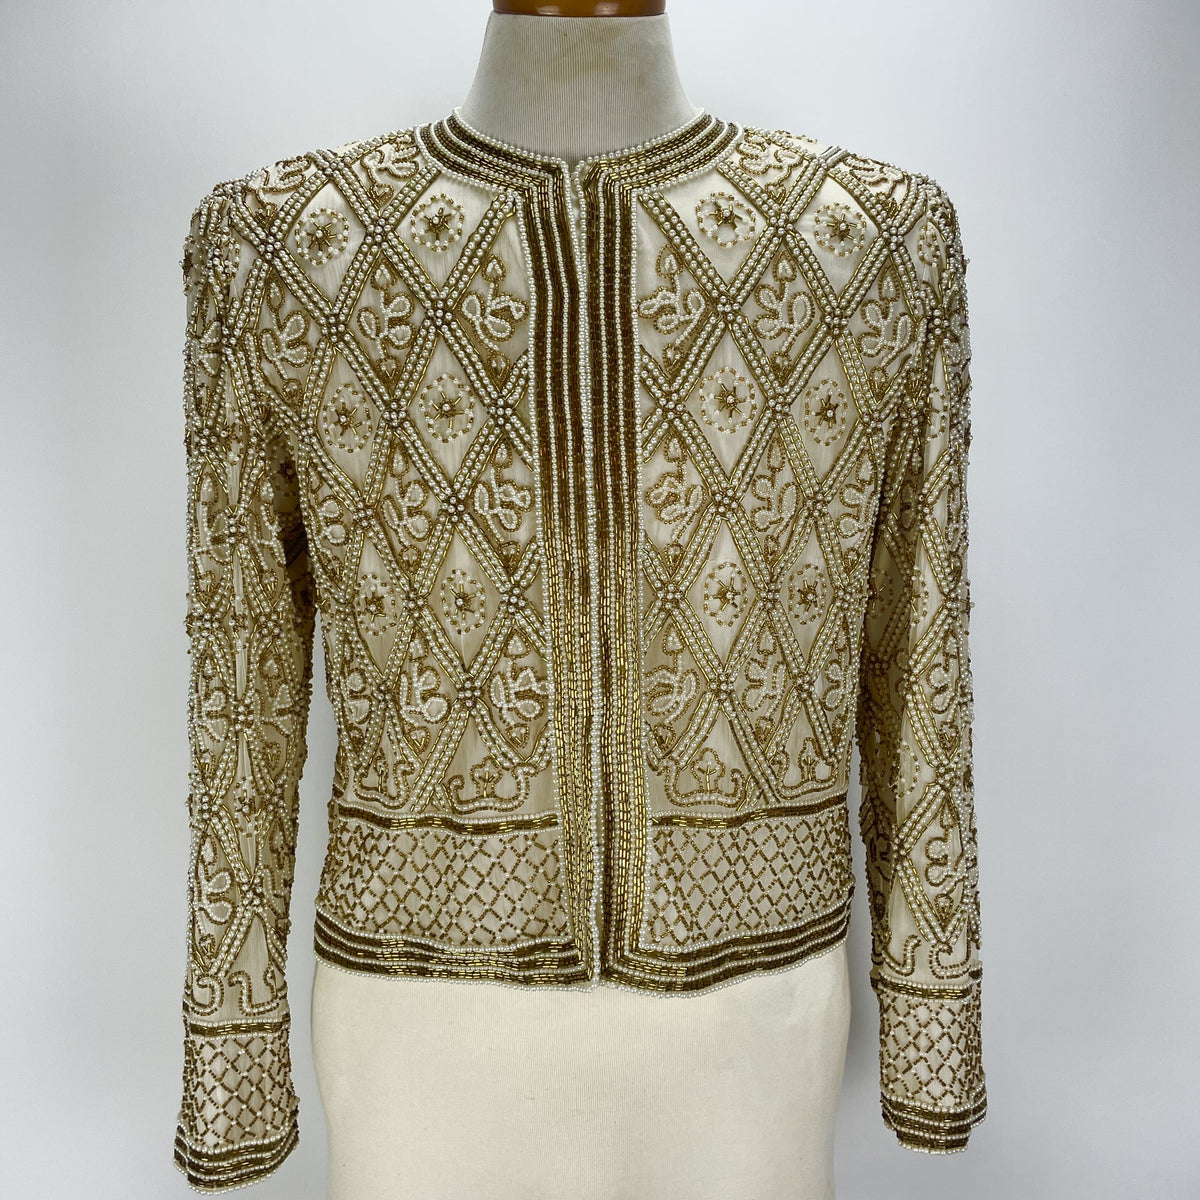 Silk Jacket With Handsewn Glass Beads - Hart & Hive